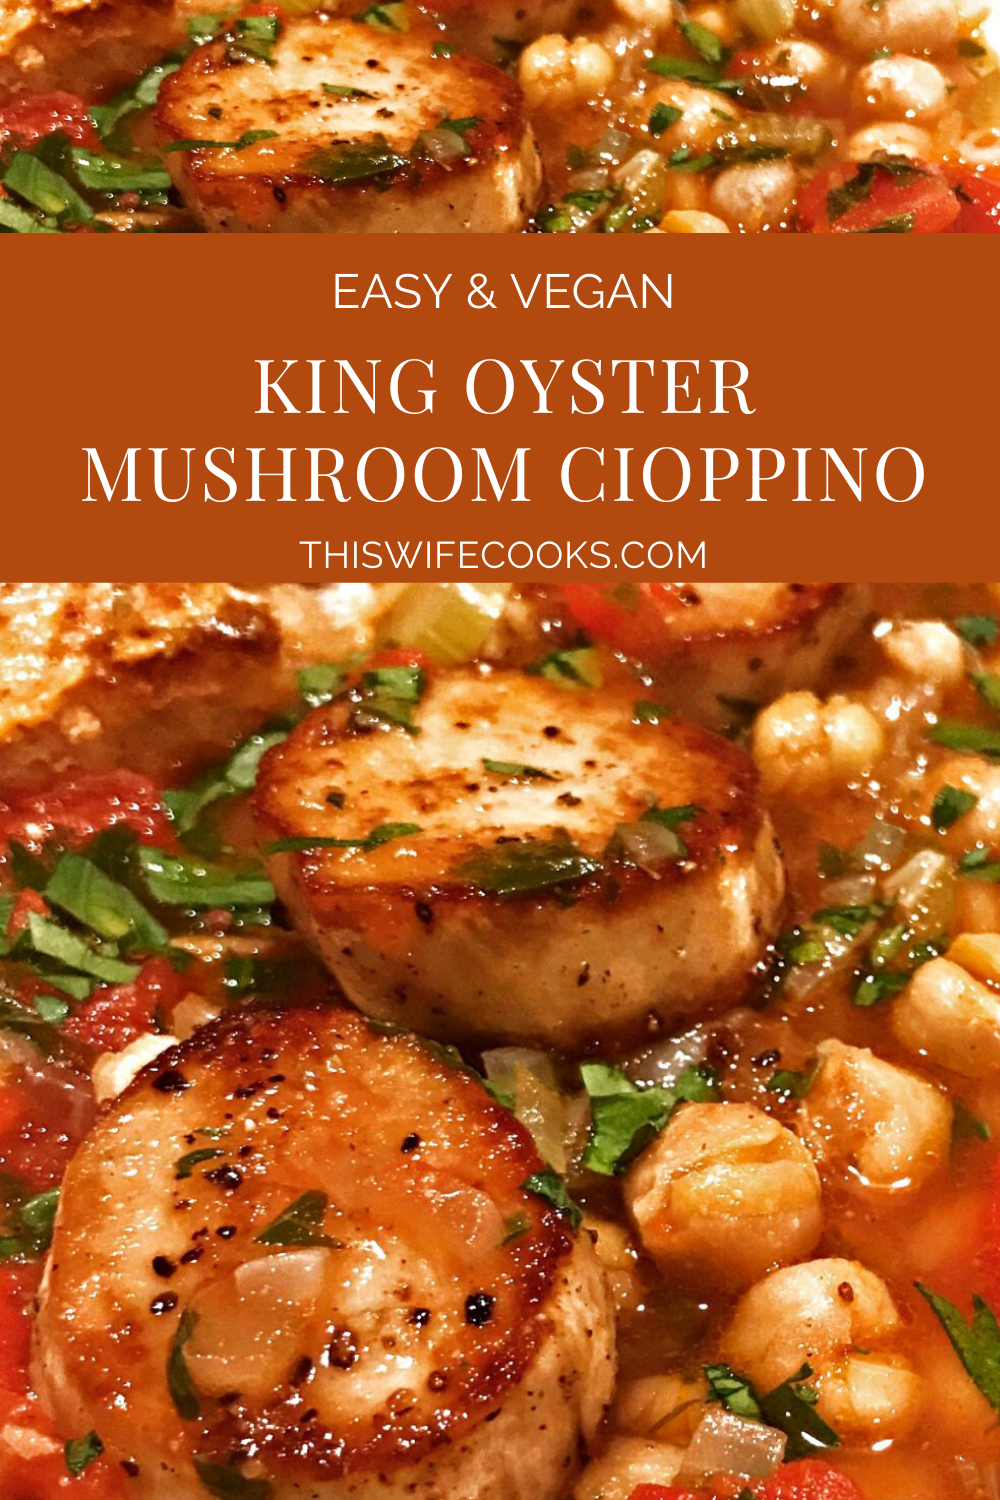 King Oyster Mushroom Cioppino - A gourmet vegan stew made with King Oyster mushroom scallops and seasoned with lots of garlic and Old Bay! #cioppino #veganseafoodrecipes via @thiswifecooks